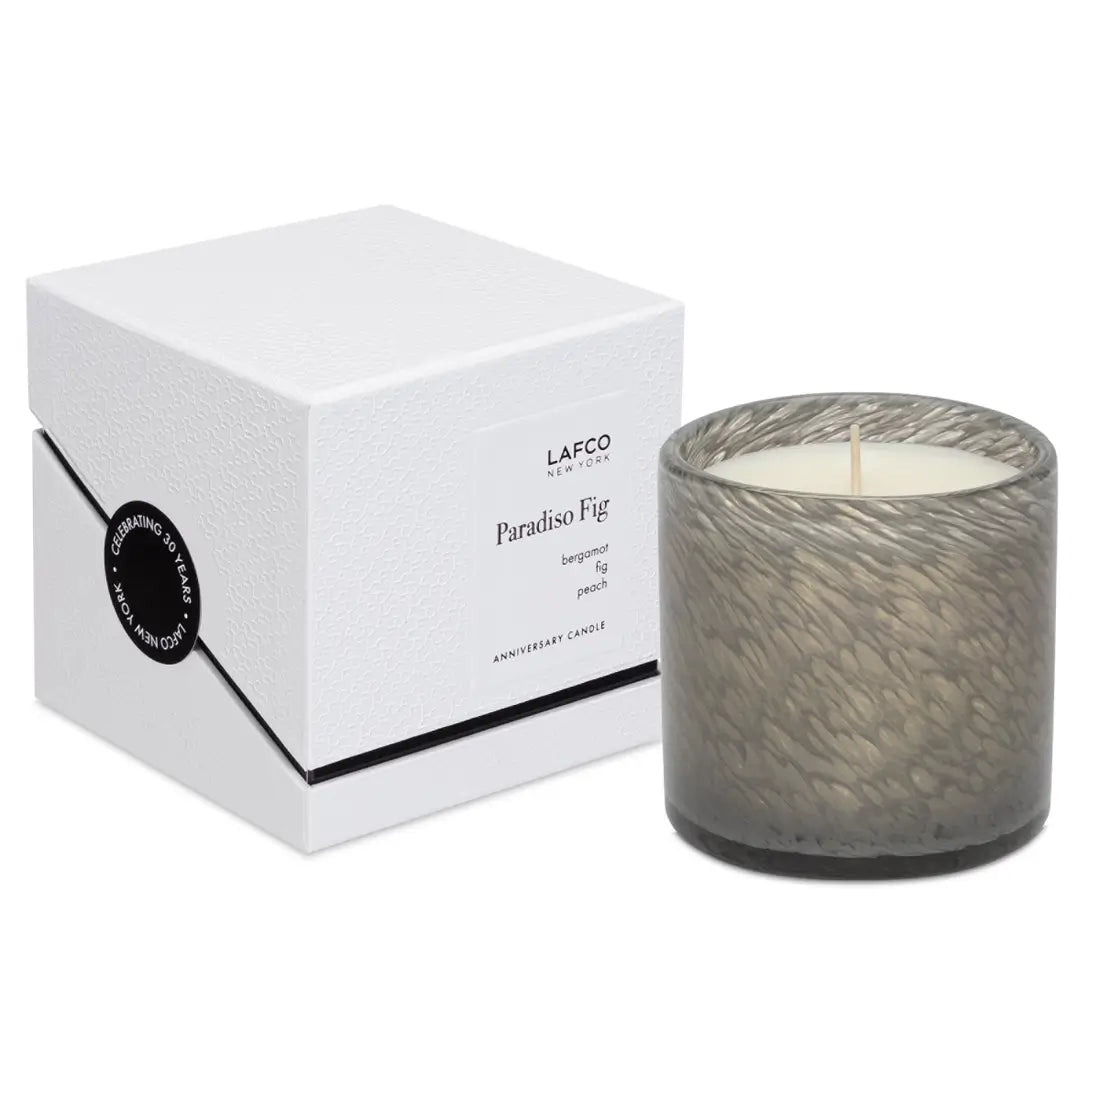 LAFCO Paradiso Fig Scented Candle - Osmology Scented Candles & Home Fragrance